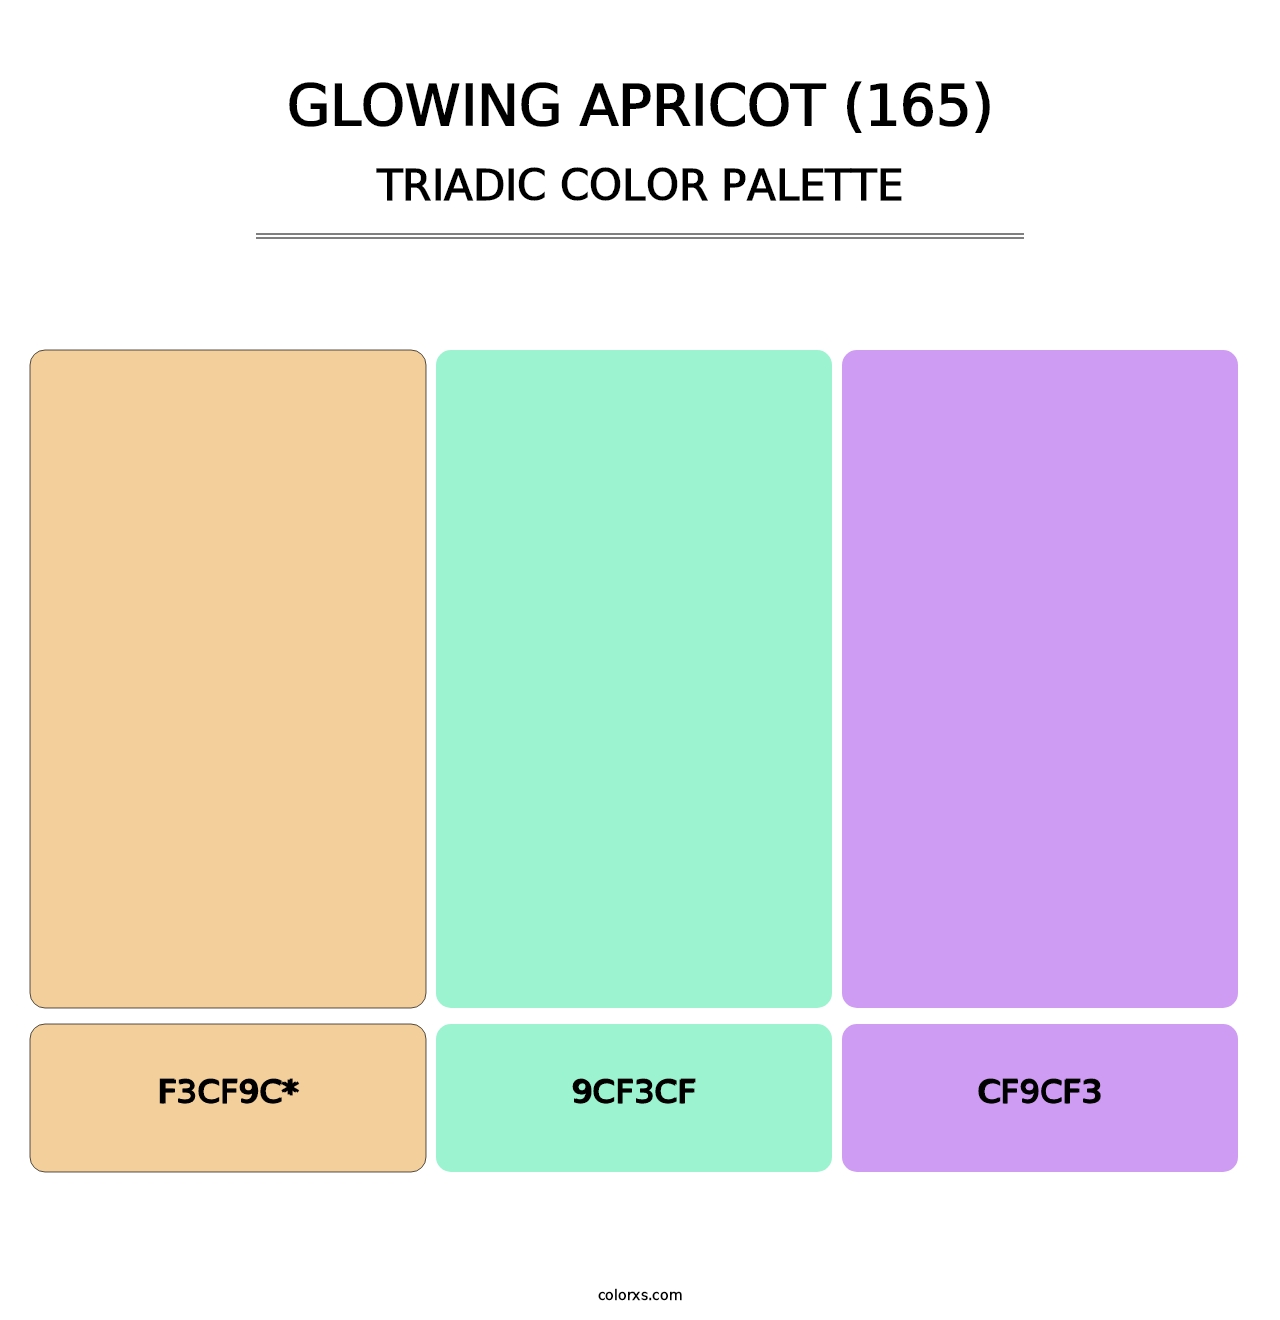 Glowing Apricot (165) - Triadic Color Palette